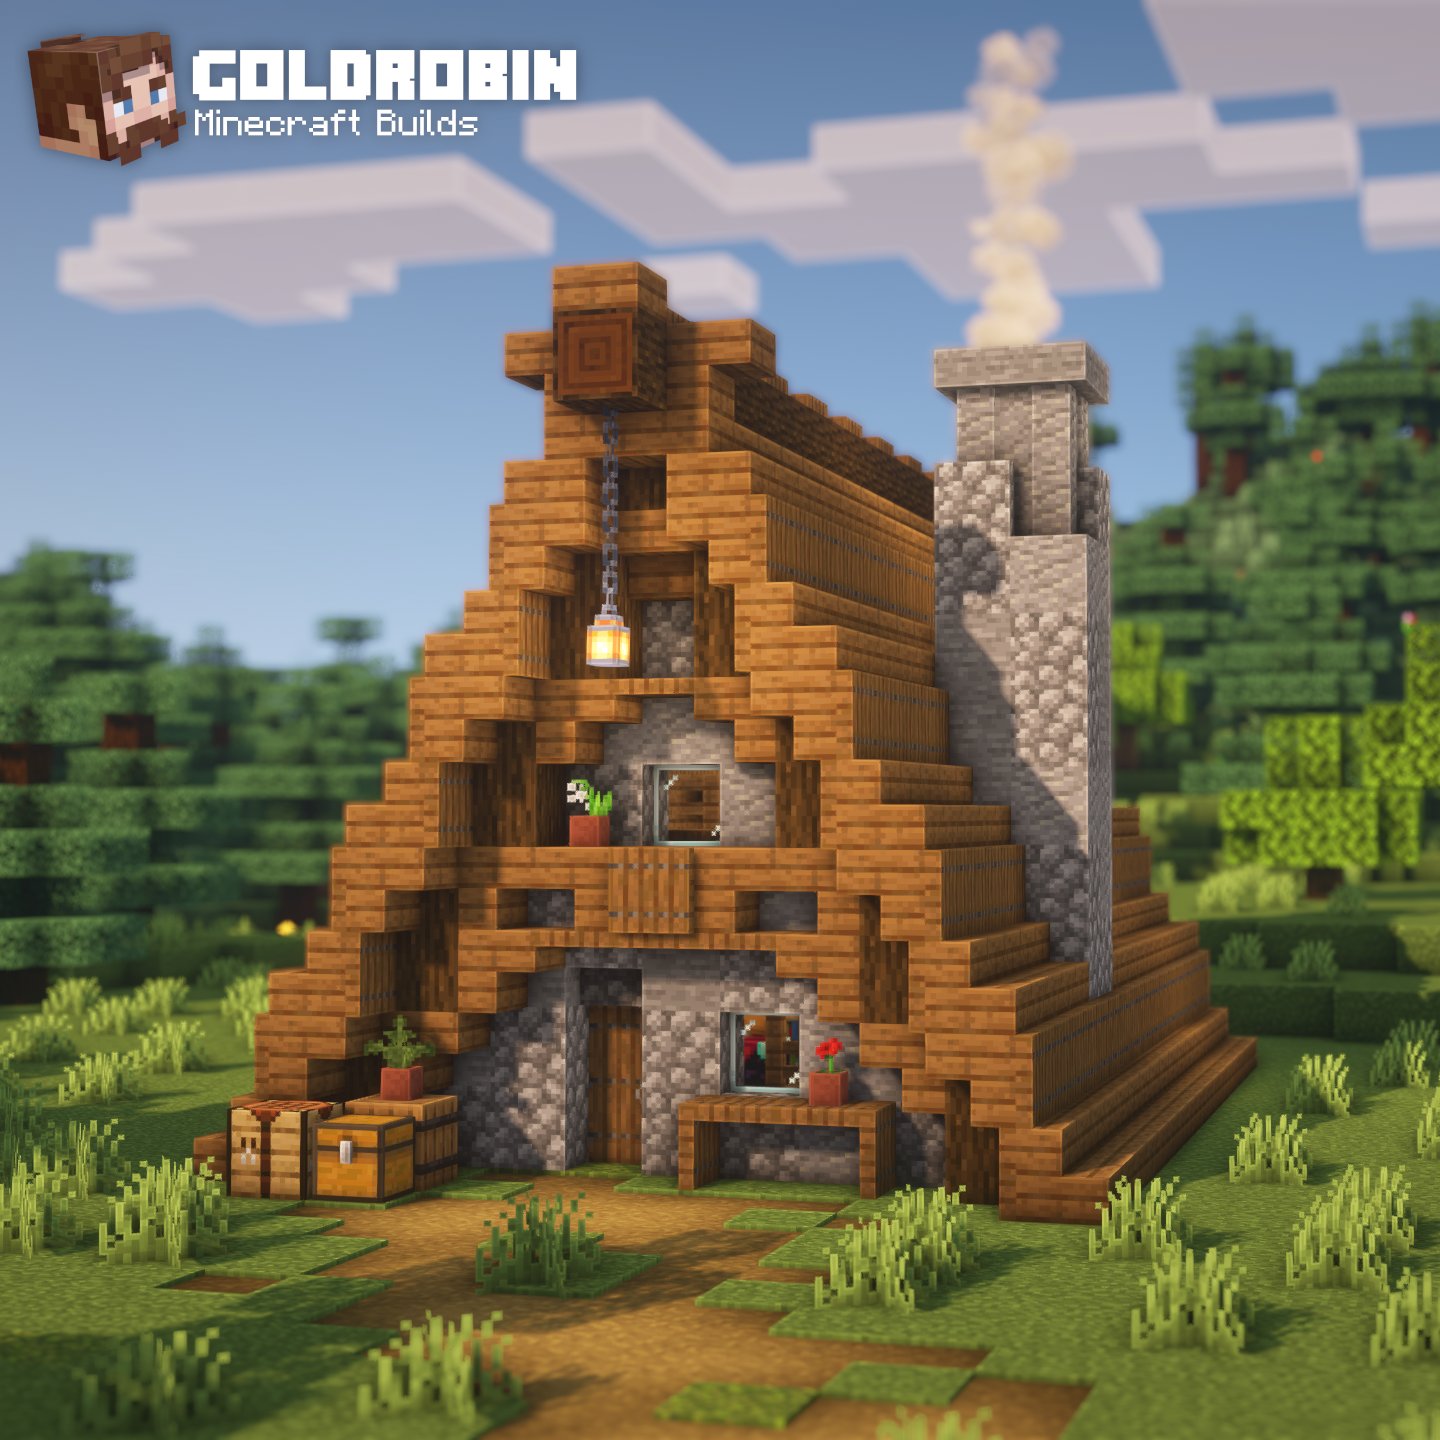 Specialty Beaten truck Thanksgiving Goldrobin no Twitter: "I built a cozy Cabin! 🏠 #Minecraft  https://t.co/YcqUTH4wWa" / Twitter